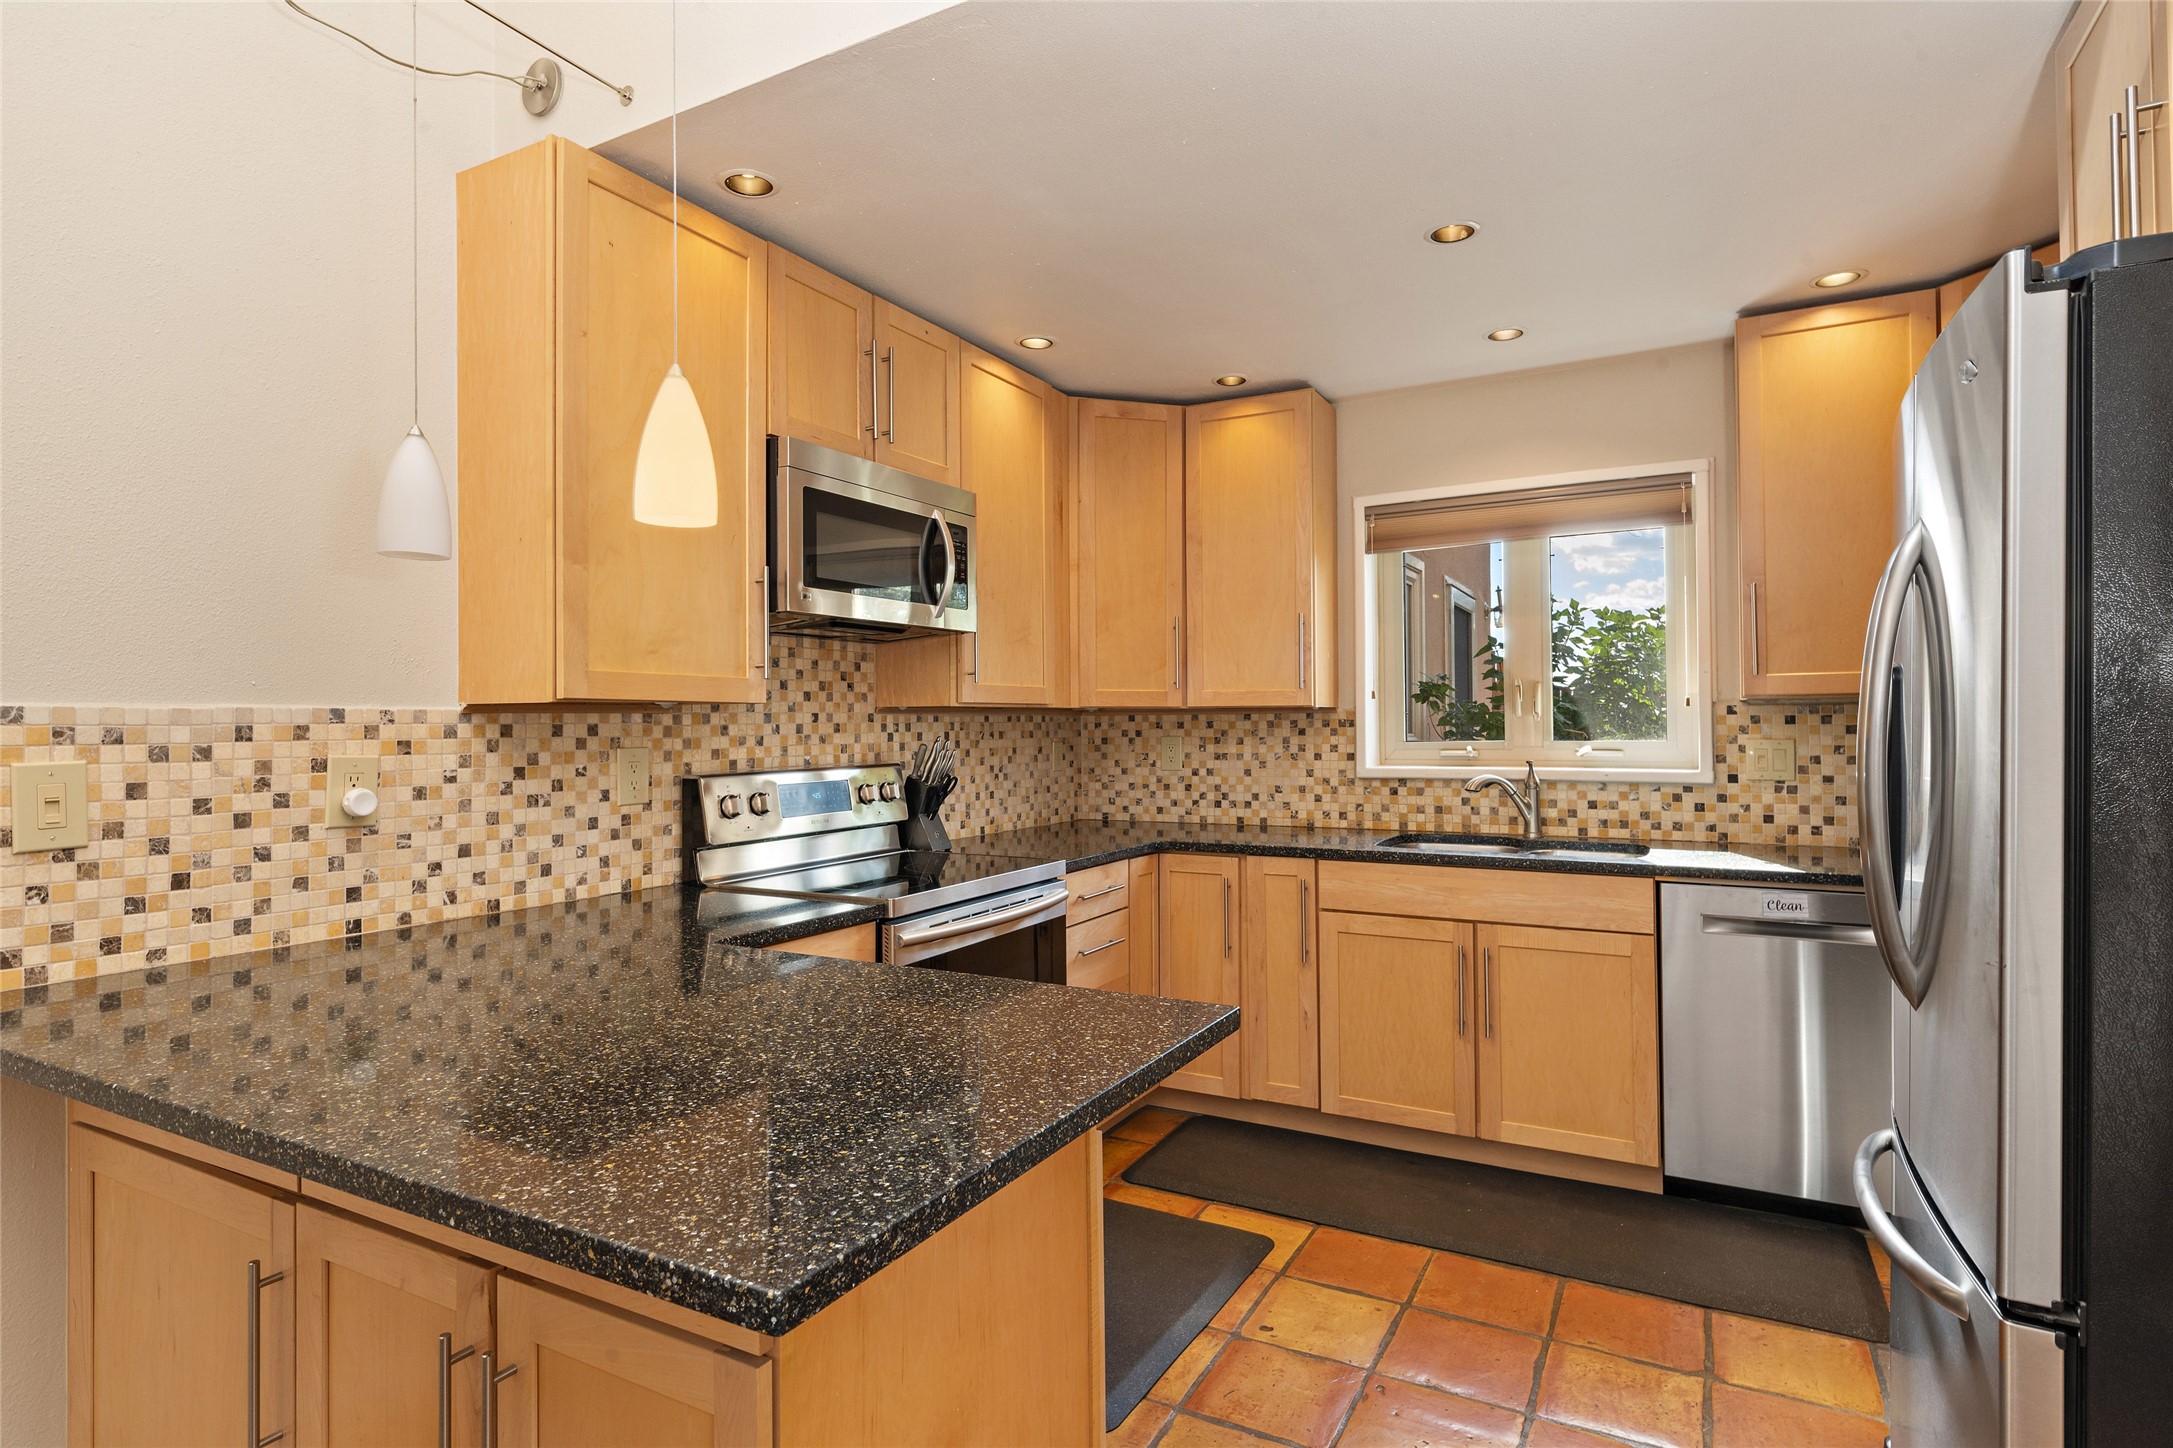 Granite counters and stainless appliances